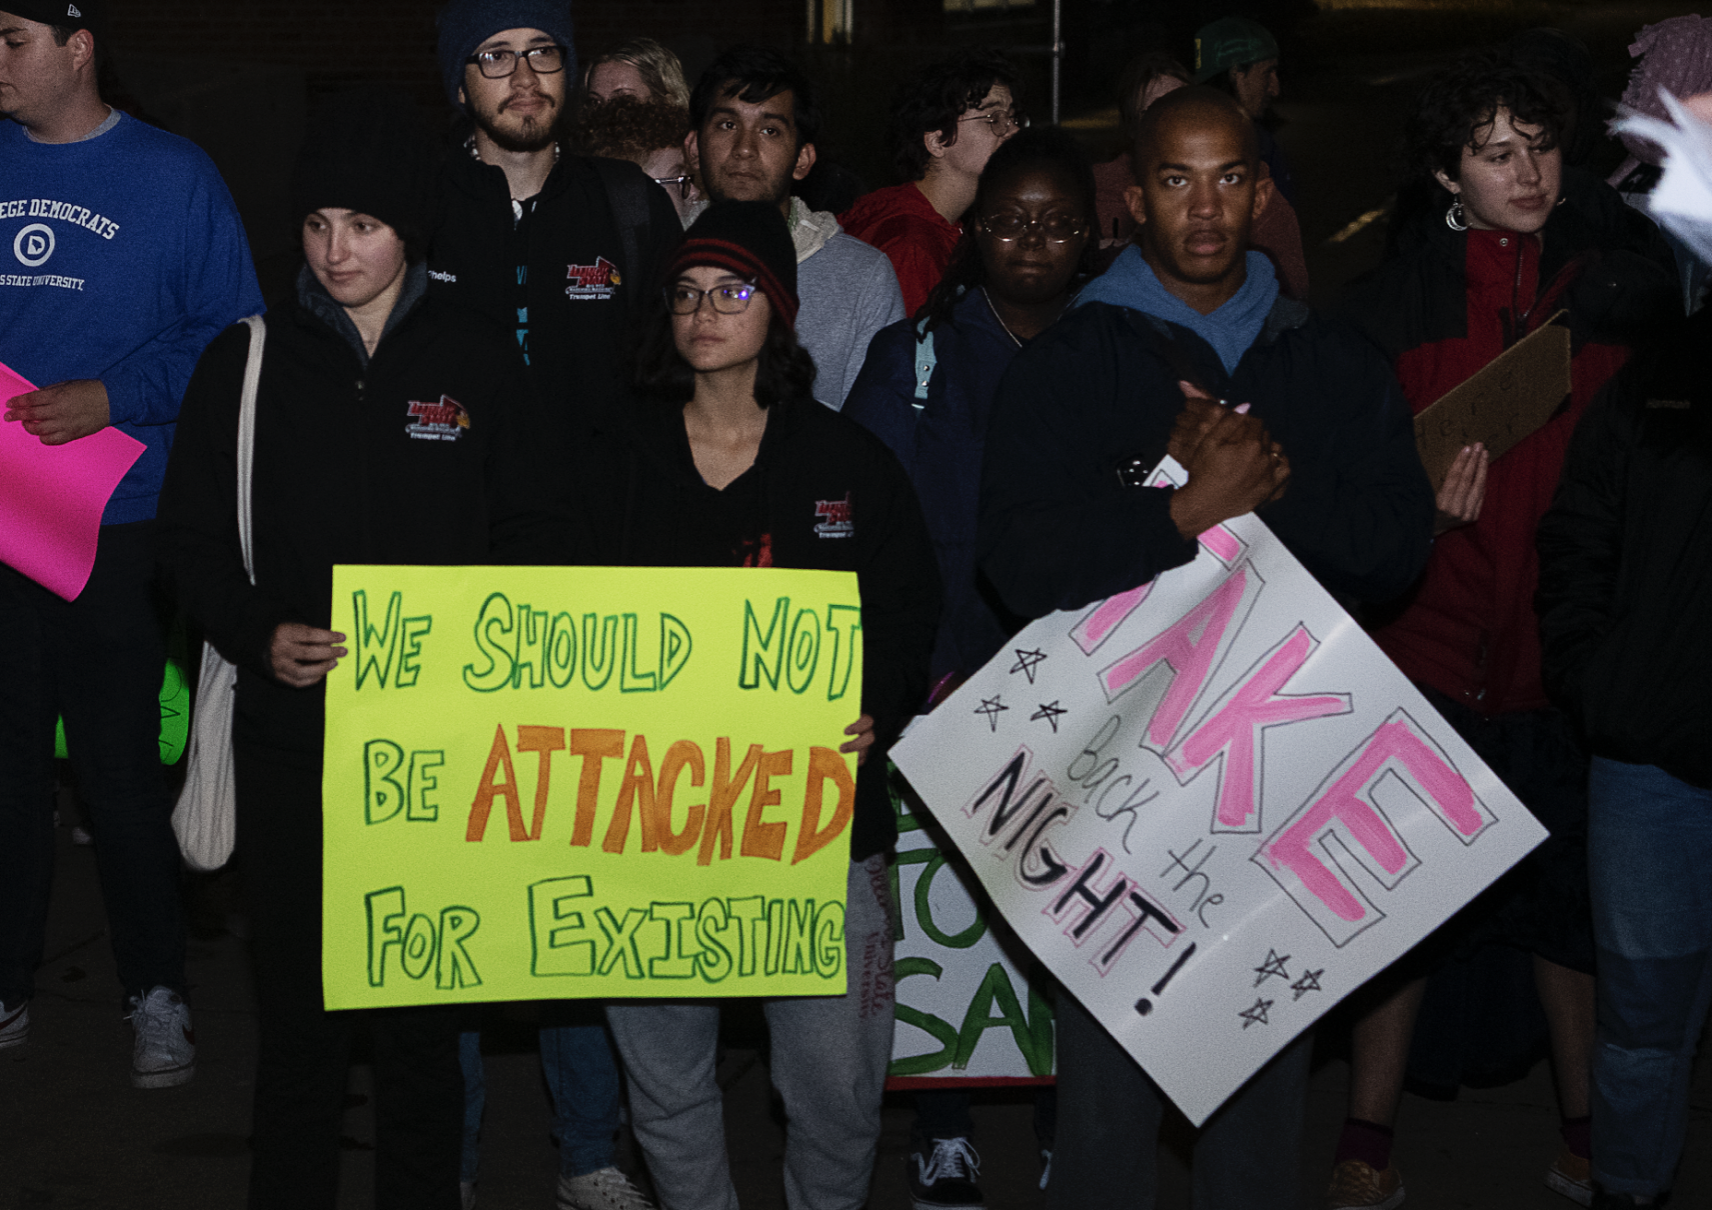 ISU students Take Back the Night to protest sexual violence with rally, march News videtteonline picture